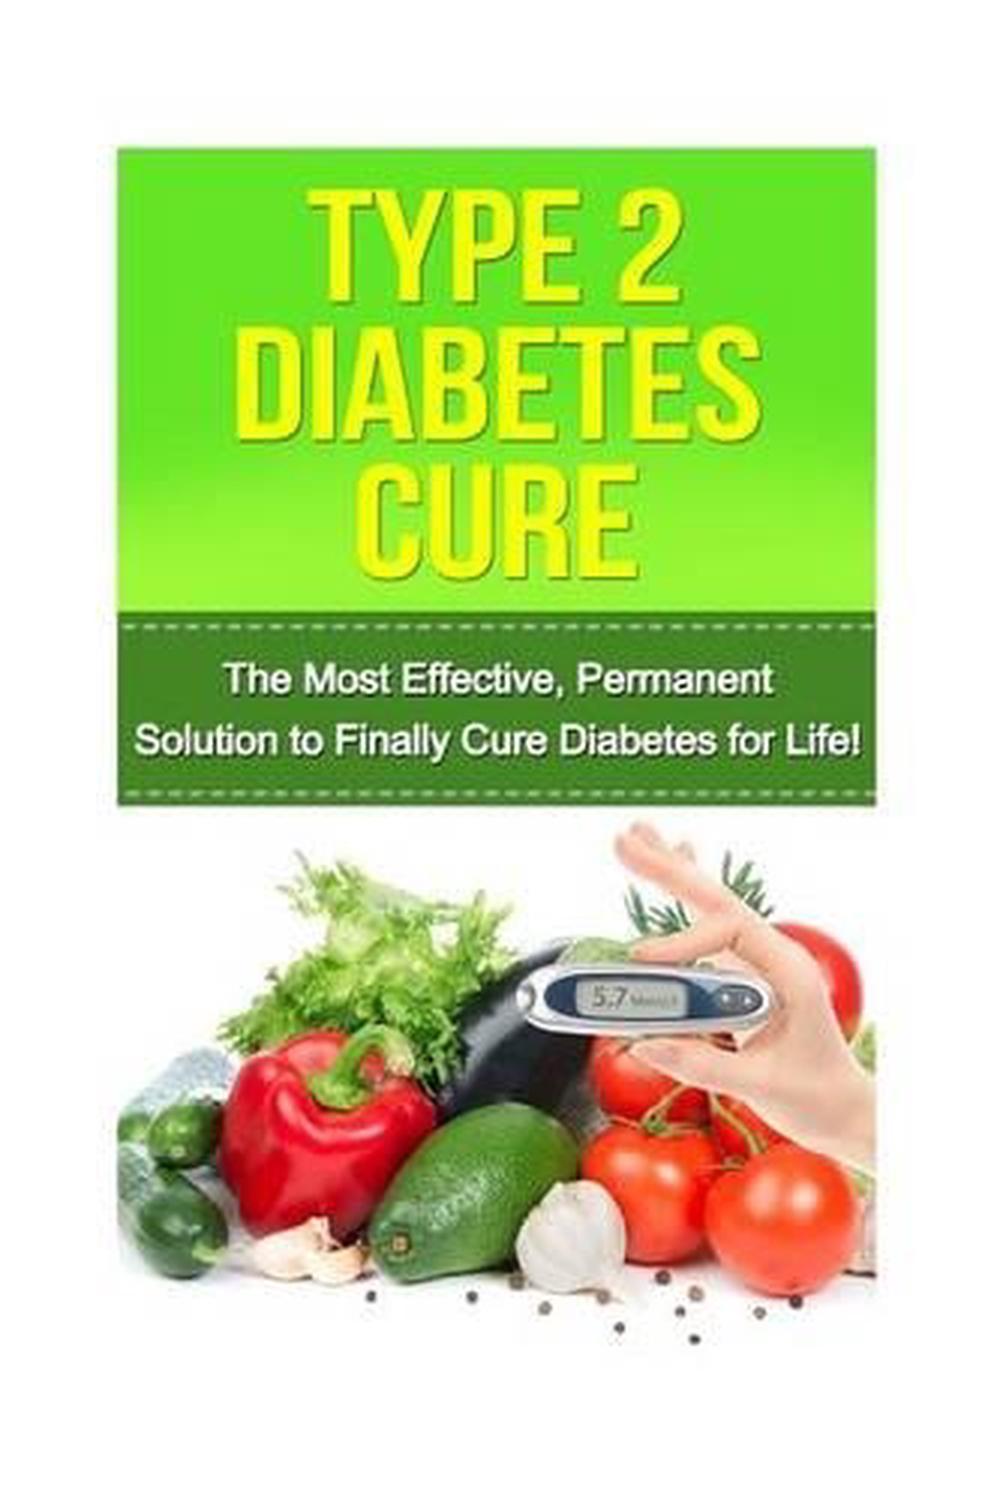 research to cure type 2 diabetes